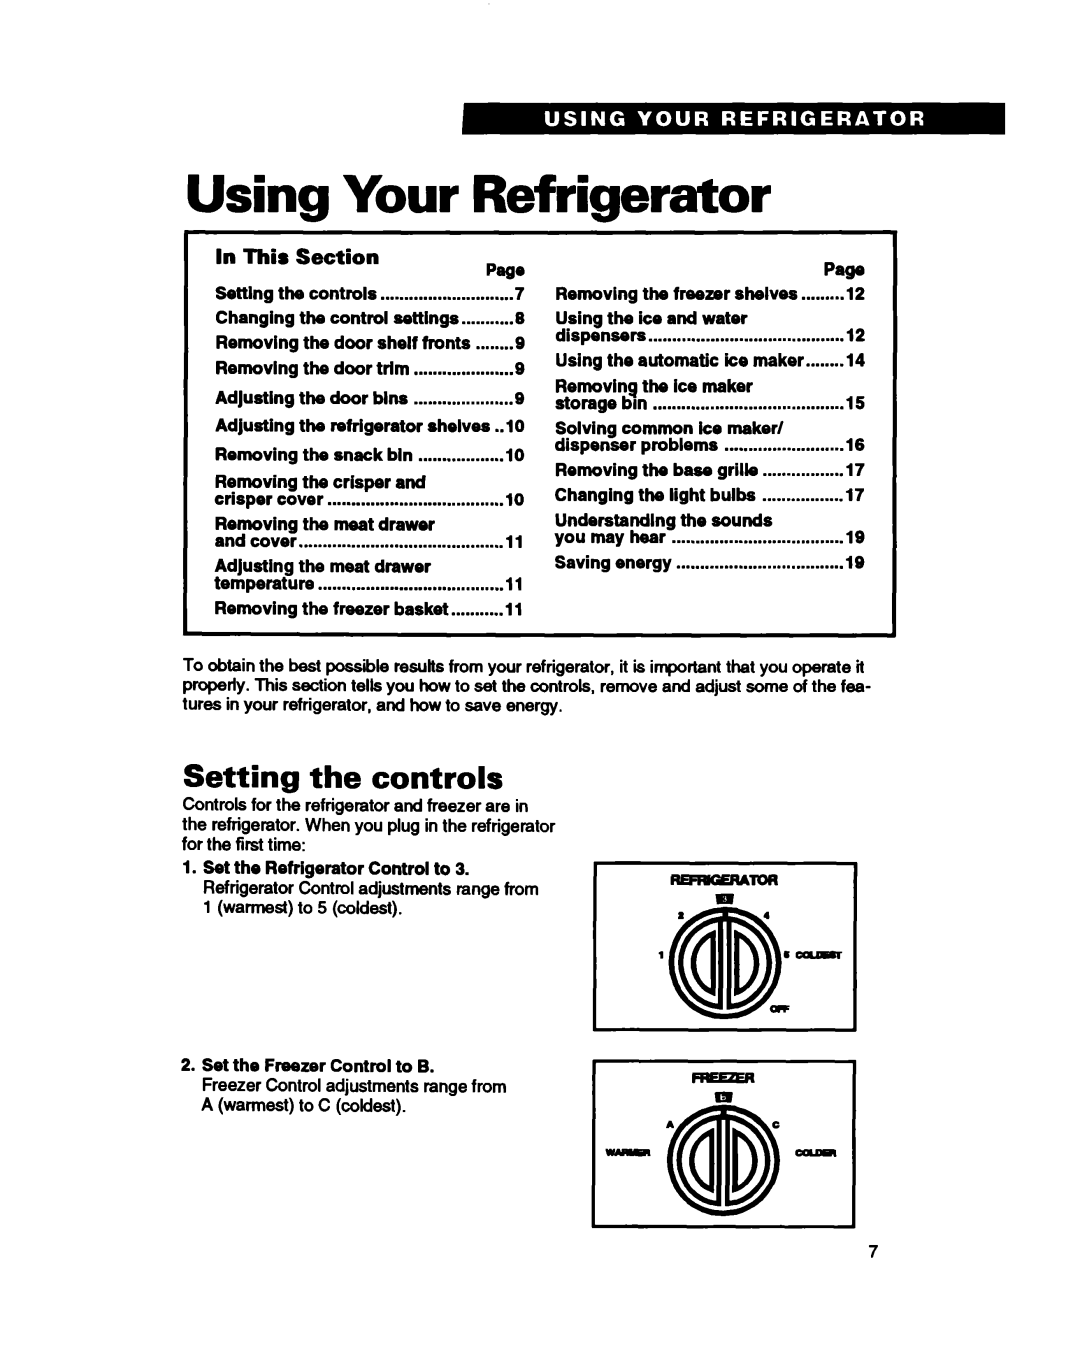 Estate TS25AQ warranty Using Your Refrigerator, Setting the controls, In This, Section, Pago 